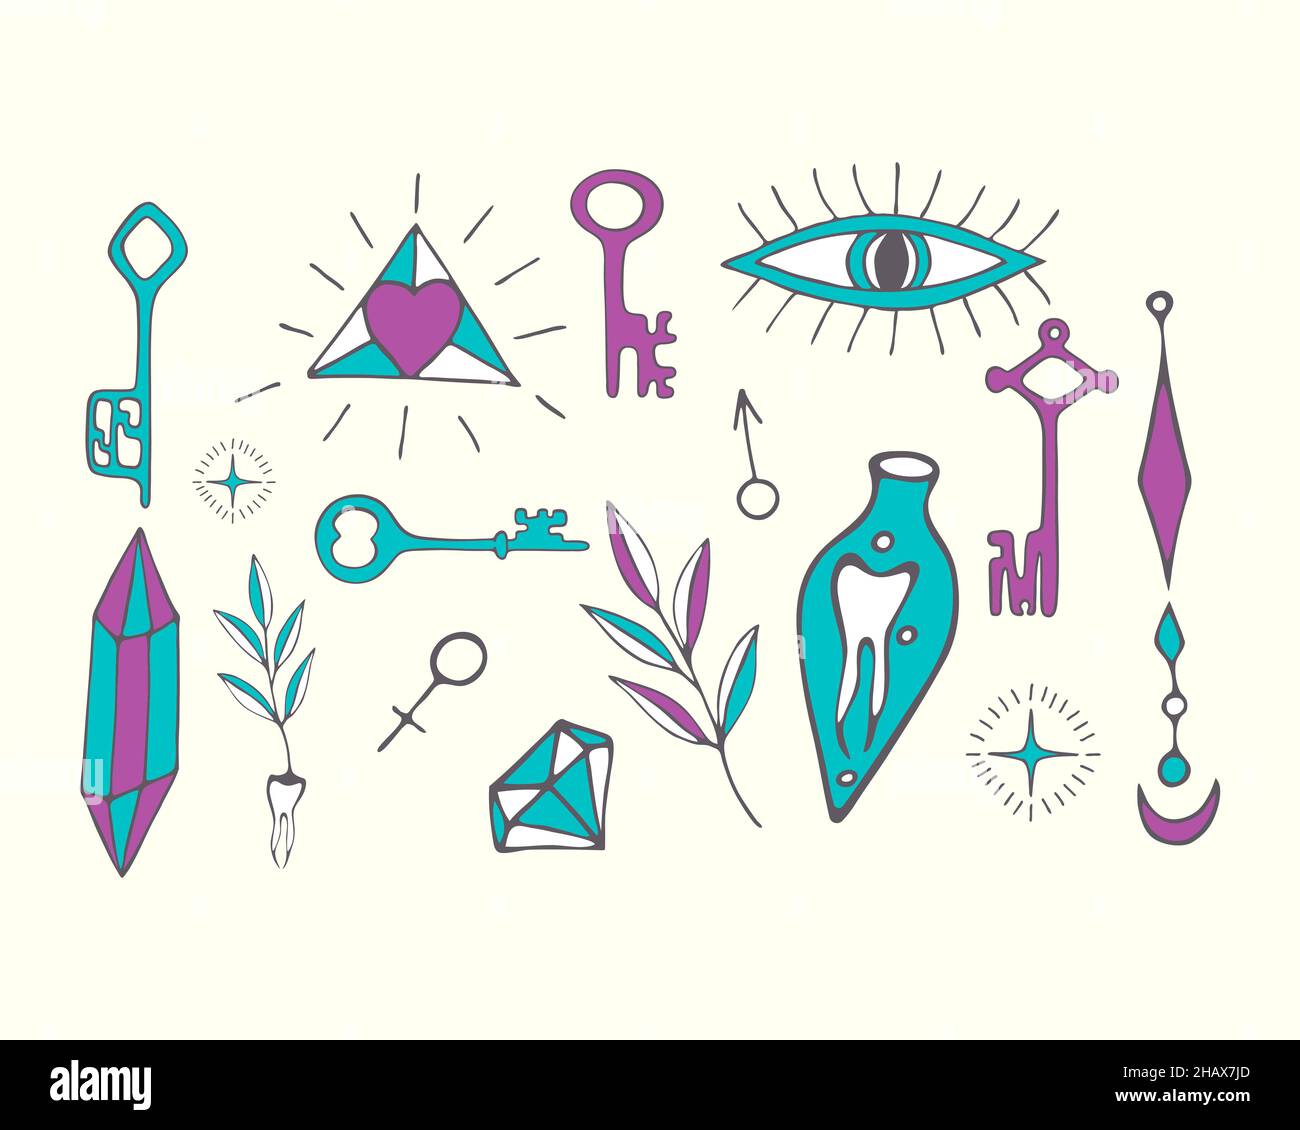 Set of hand drawn doodle Magic tarot. Vector illustration of magic, symbols of witchcraft. Elements of witchcraft concept potion crystal keys of mandrake. Vector illustration Stock Vector